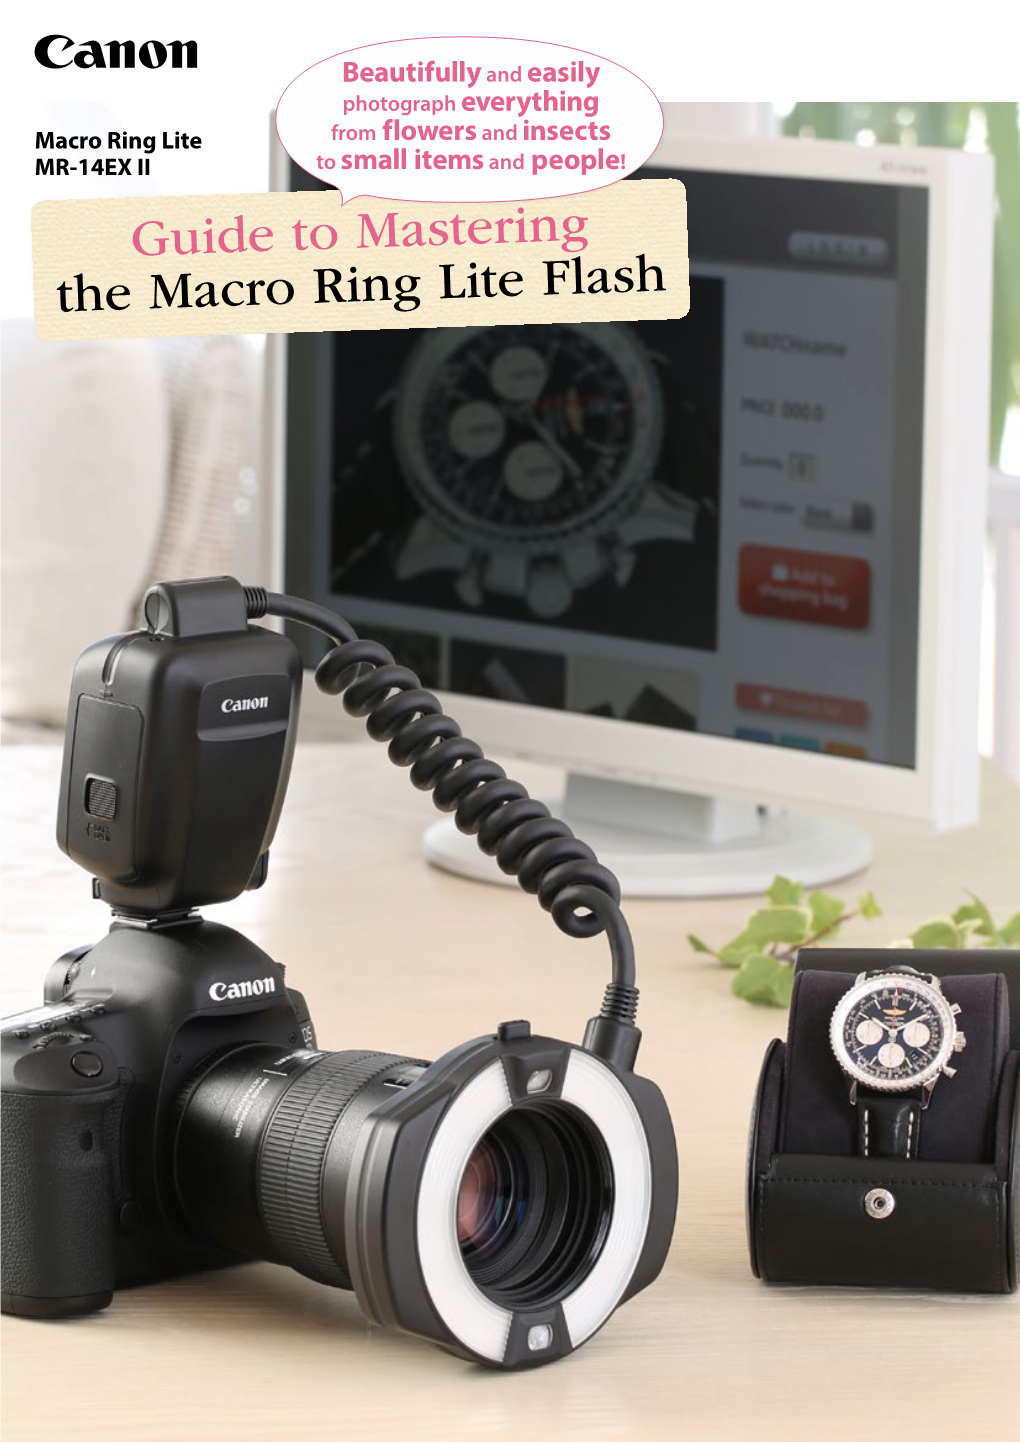 Guide to Mastering the Macro Ring Lite Flash